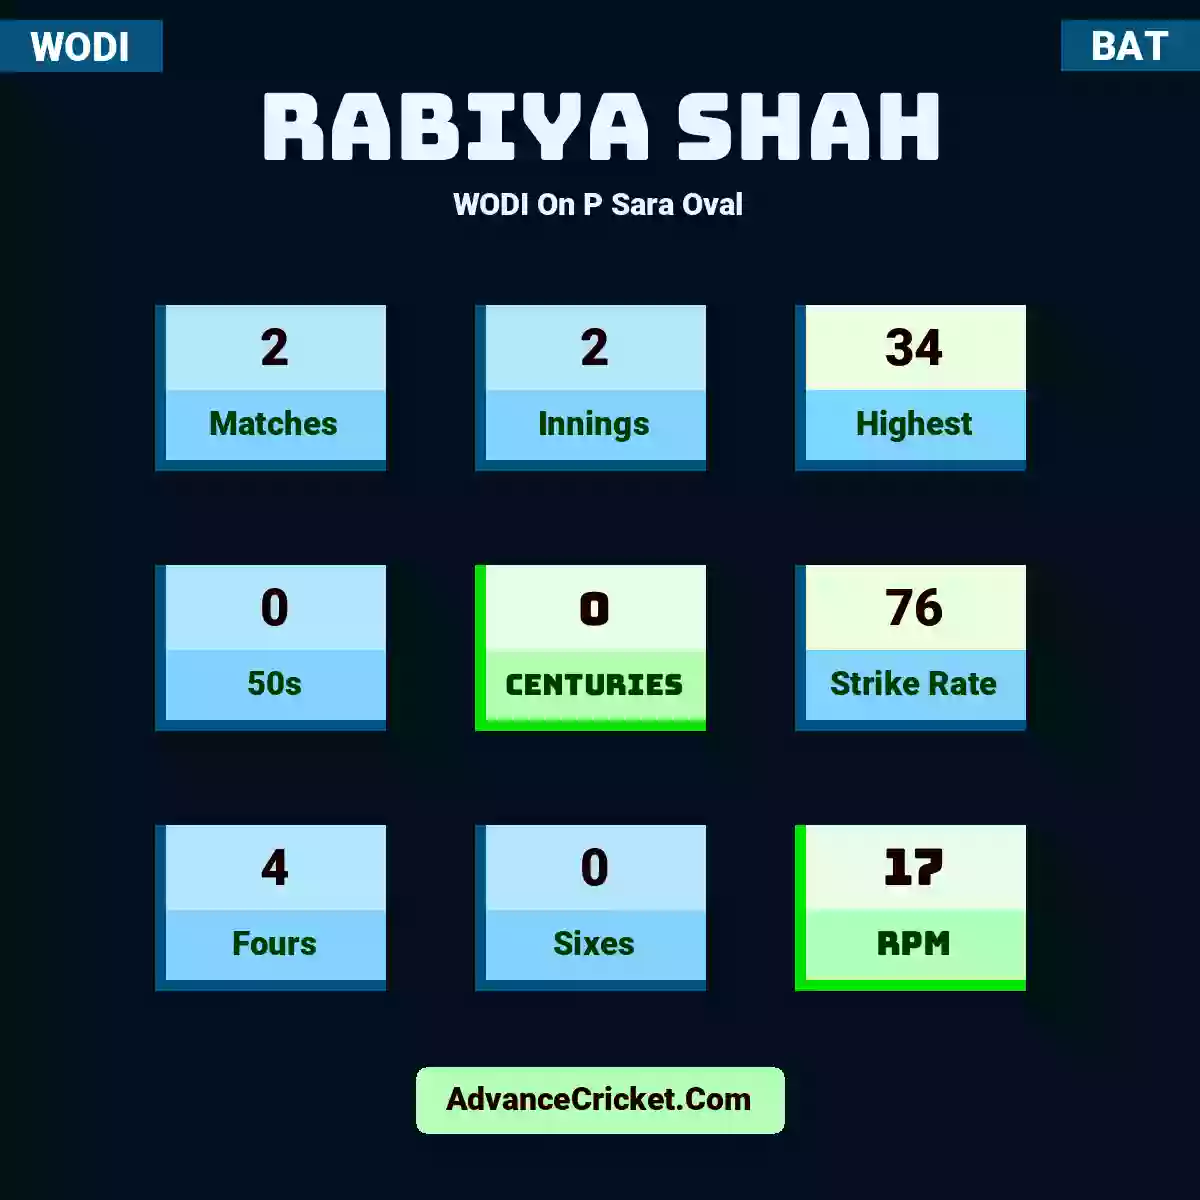 Rabiya Shah WODI  On P Sara Oval, Rabiya Shah played 2 matches, scored 34 runs as highest, 0 half-centuries, and 0 centuries, with a strike rate of 76. R.Shah hit 4 fours and 0 sixes, with an RPM of 17.